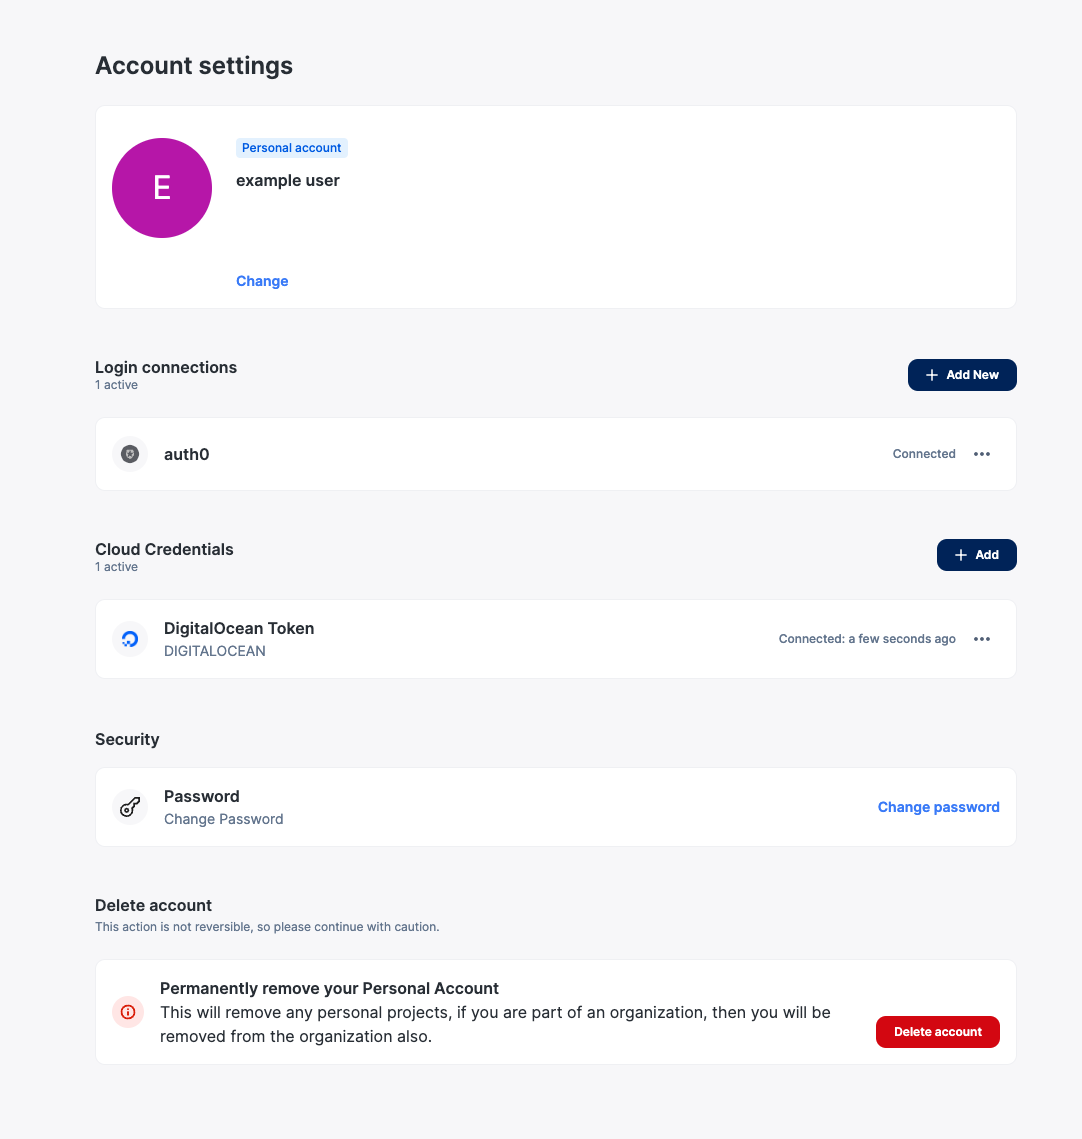 Account settings page with new token